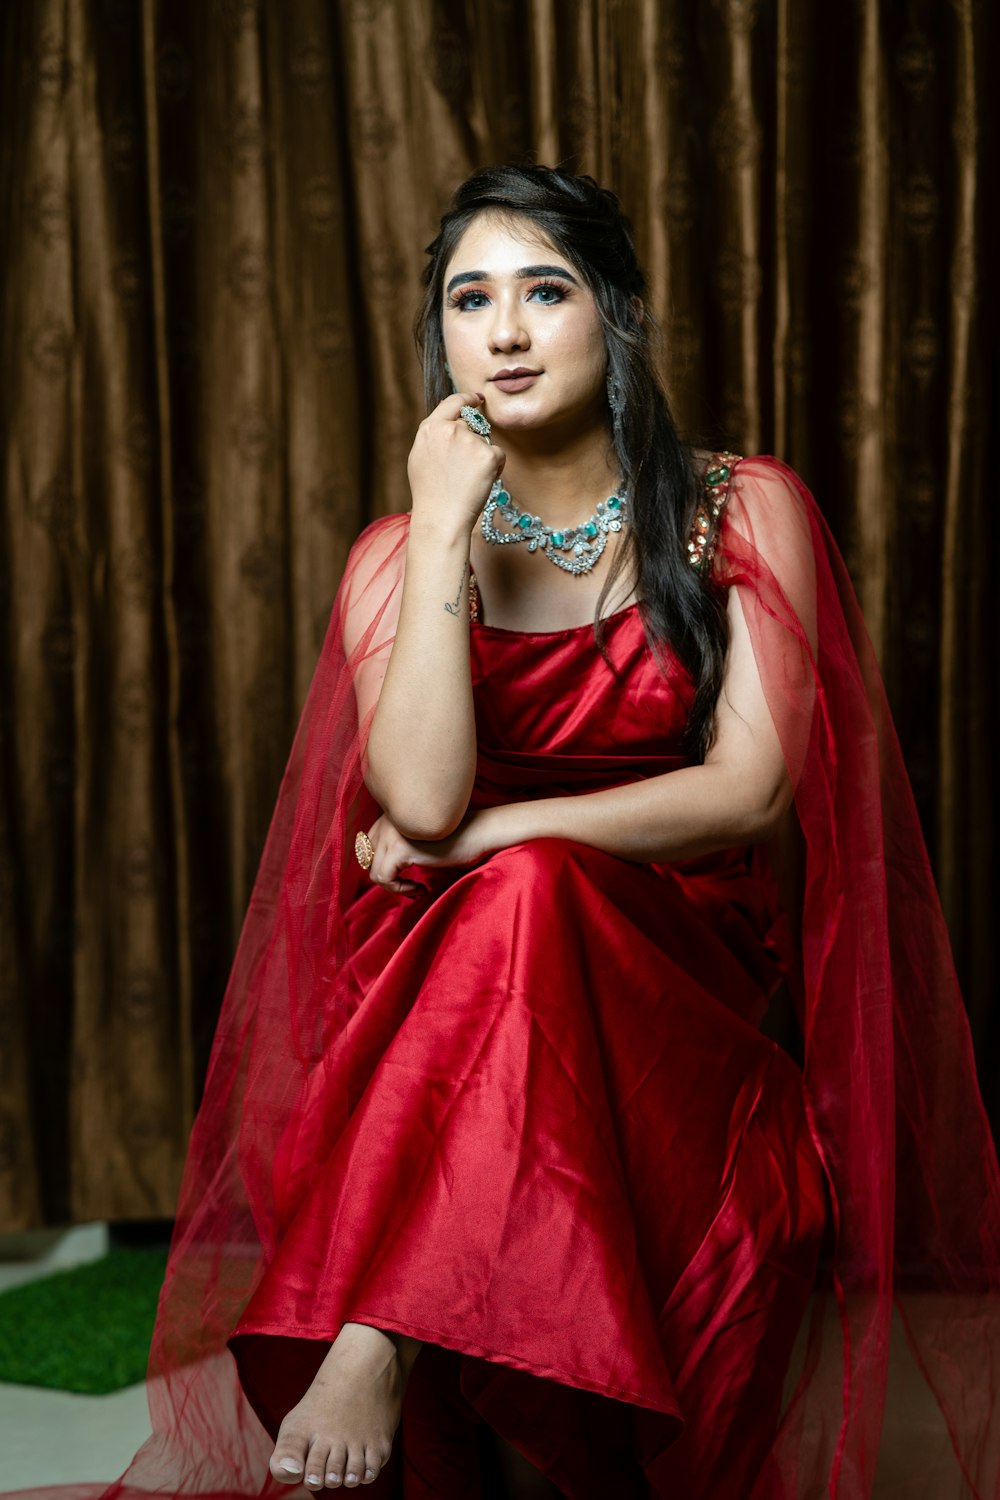 a woman in a red dress is posing for a picture